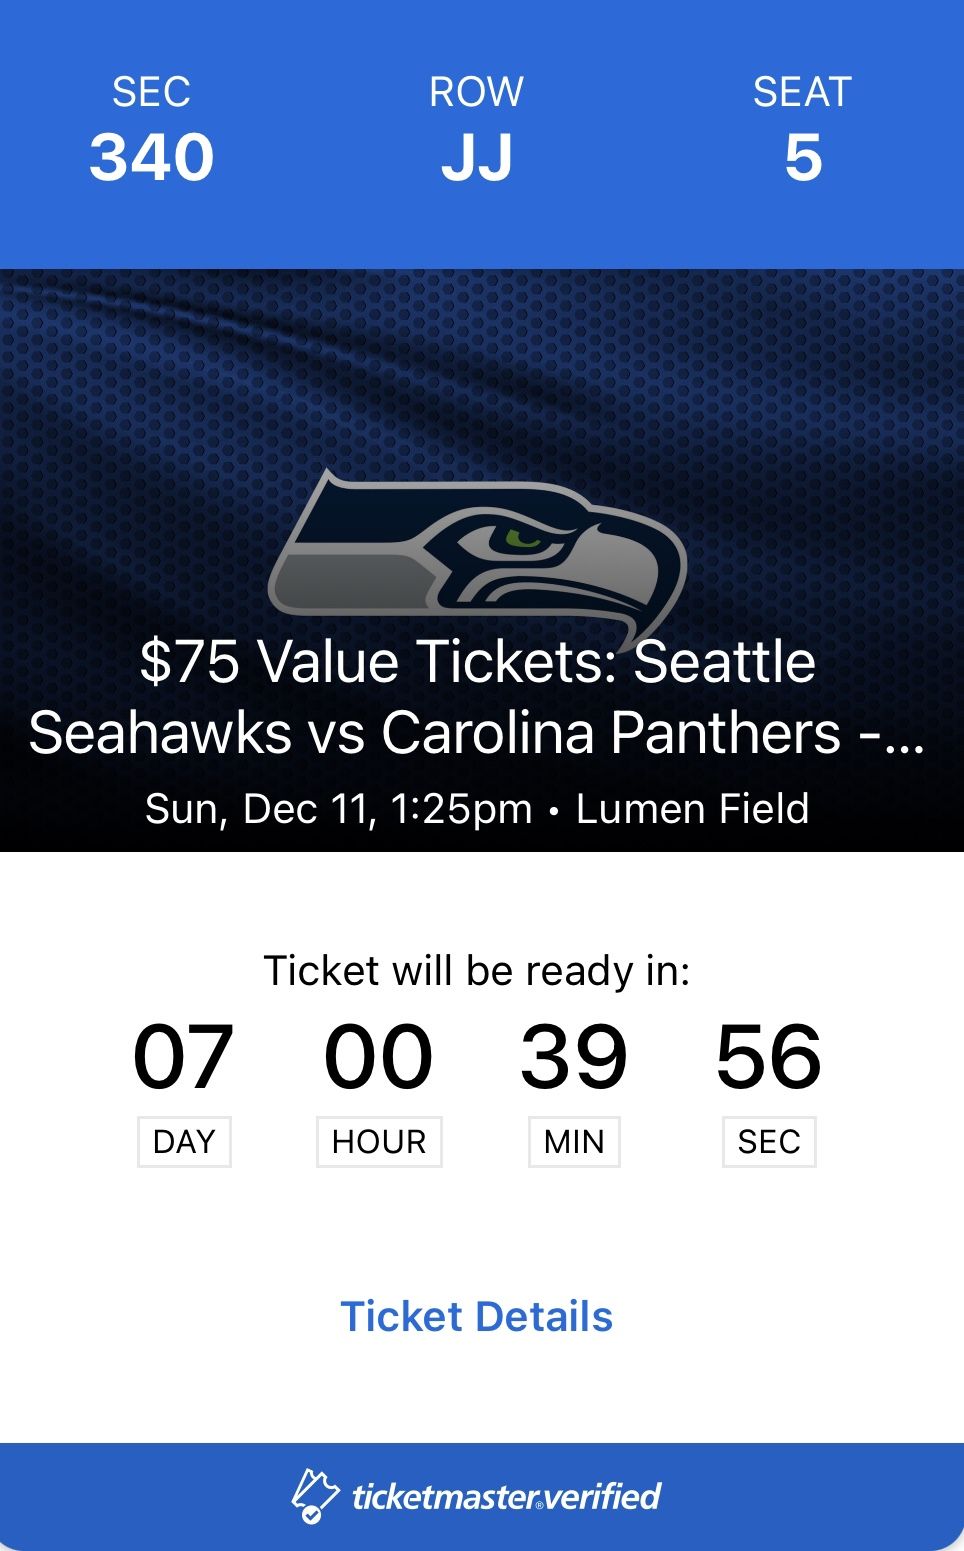 TWO Seahawks Vs Panthers @ Seattle Tickets